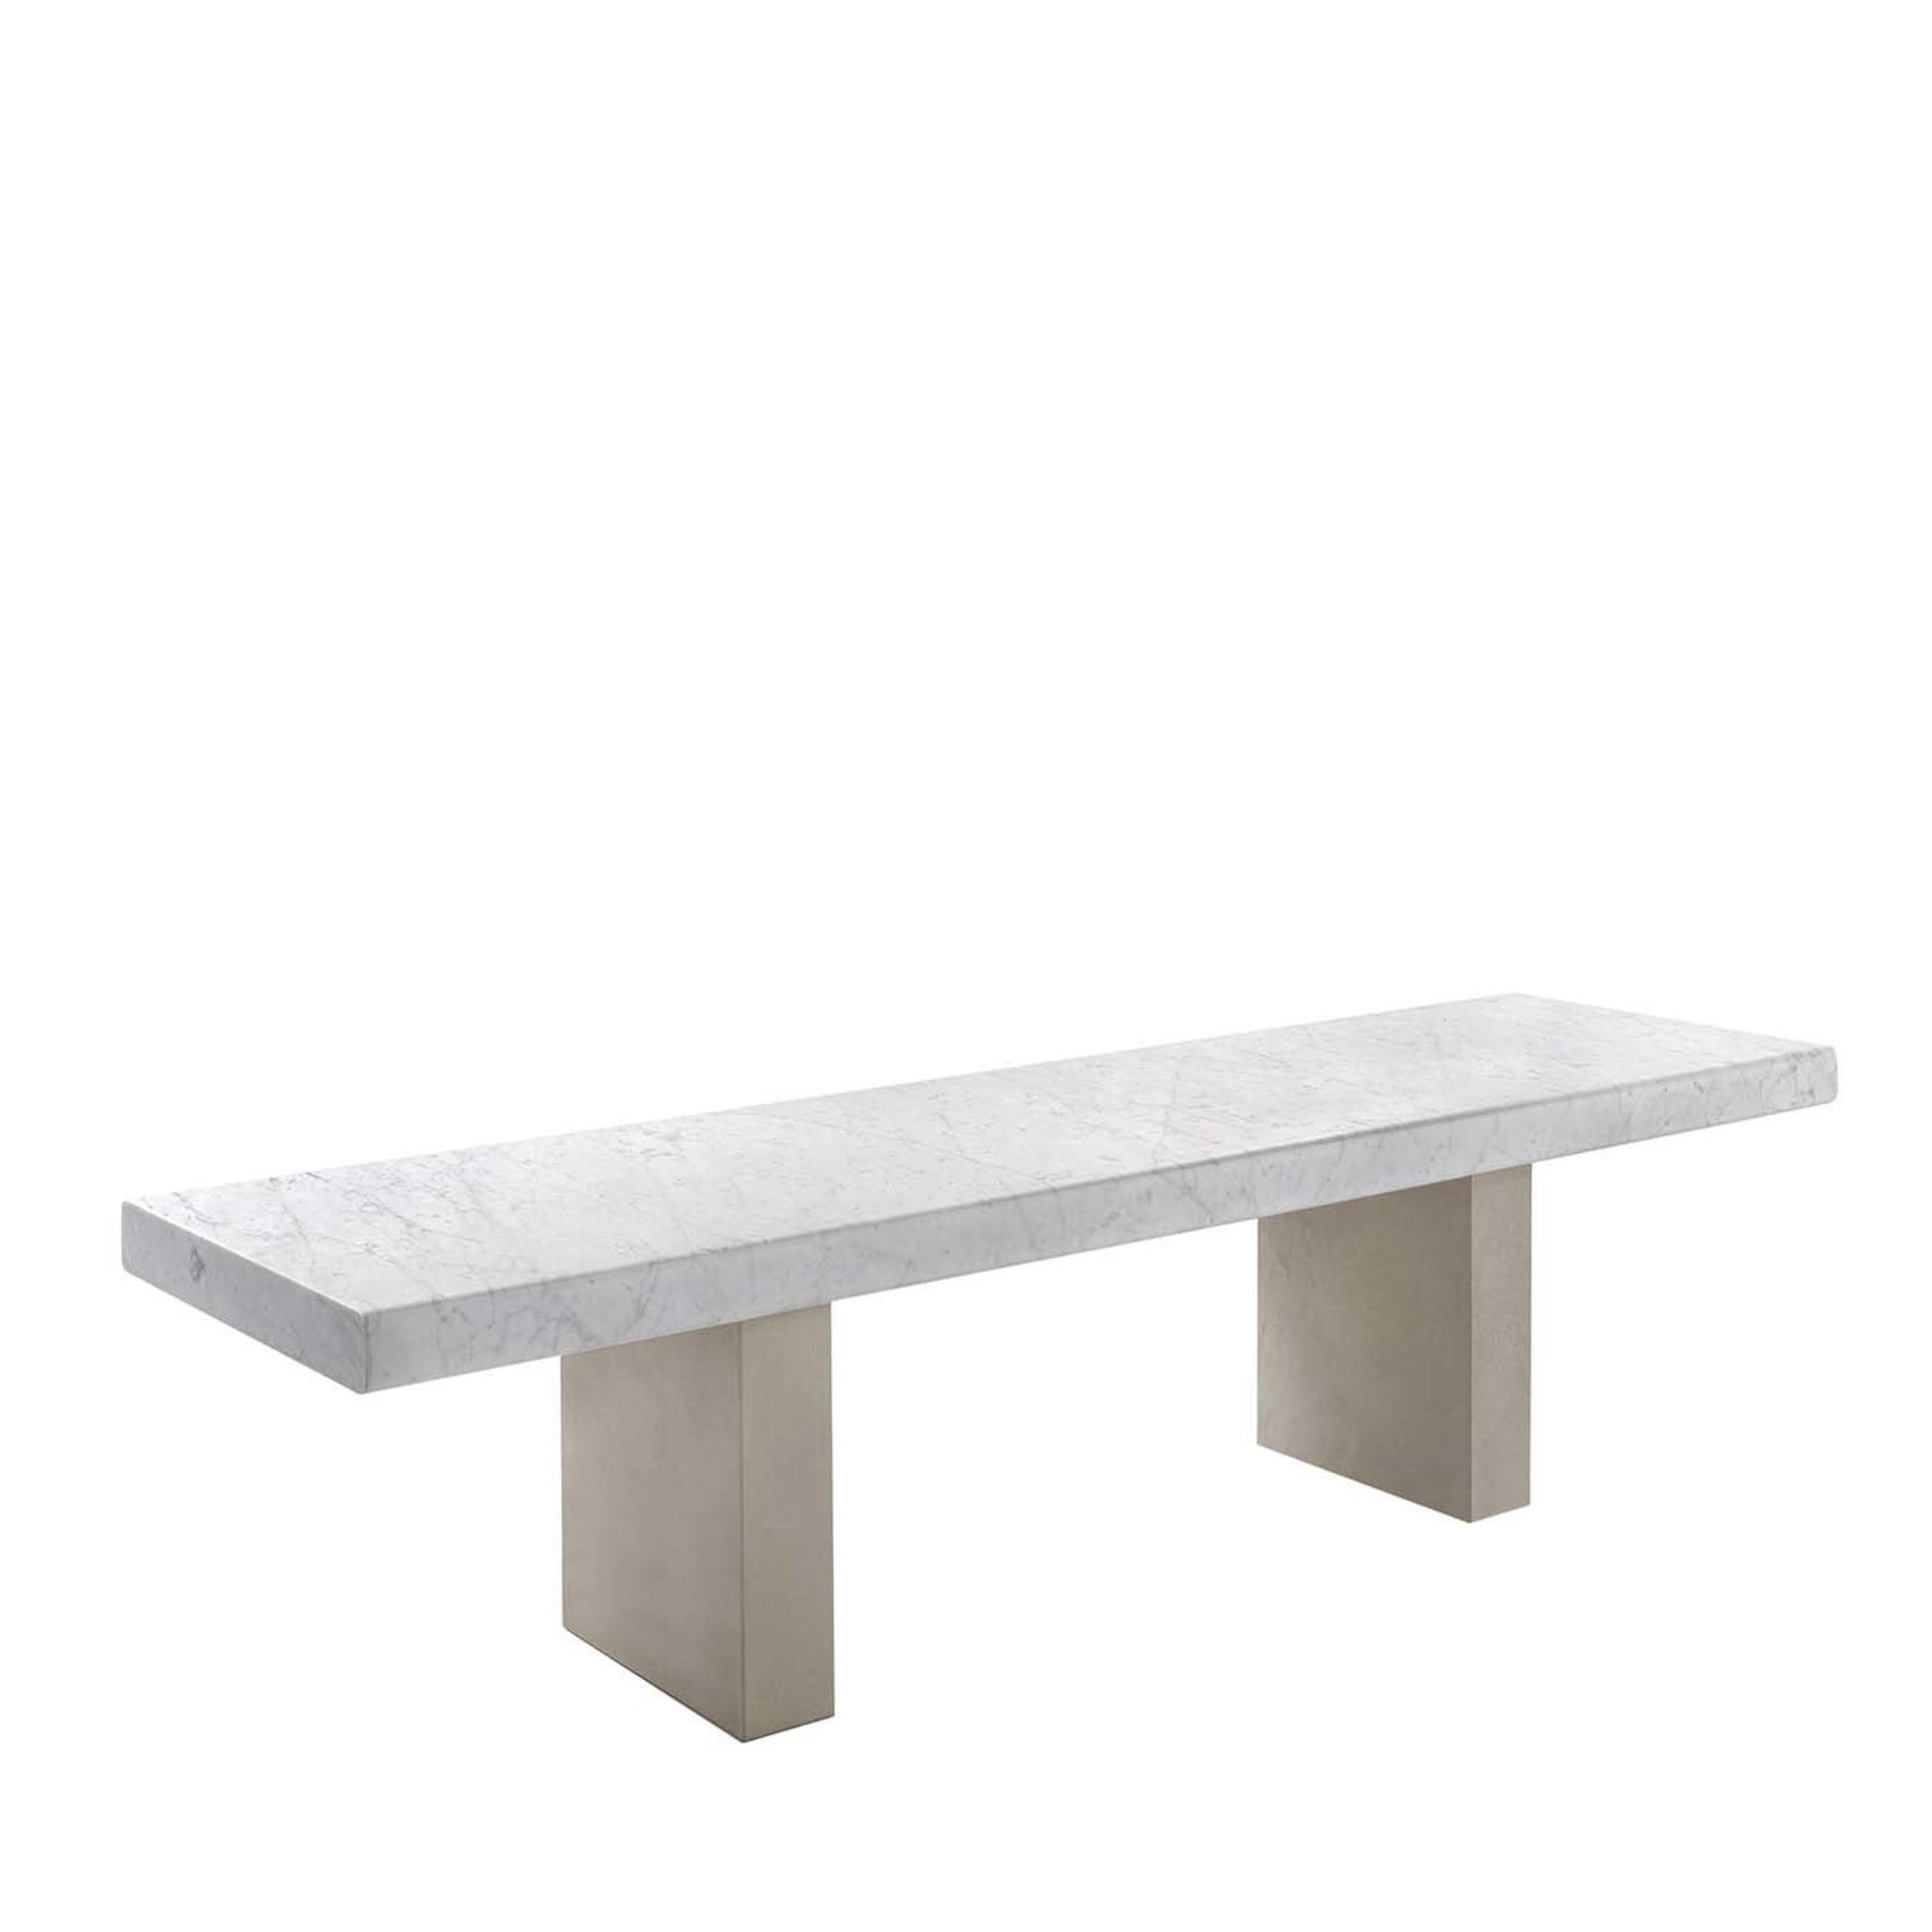 Span Outdoor Rectangular Dining Table by John Pawson - Alternative view 1